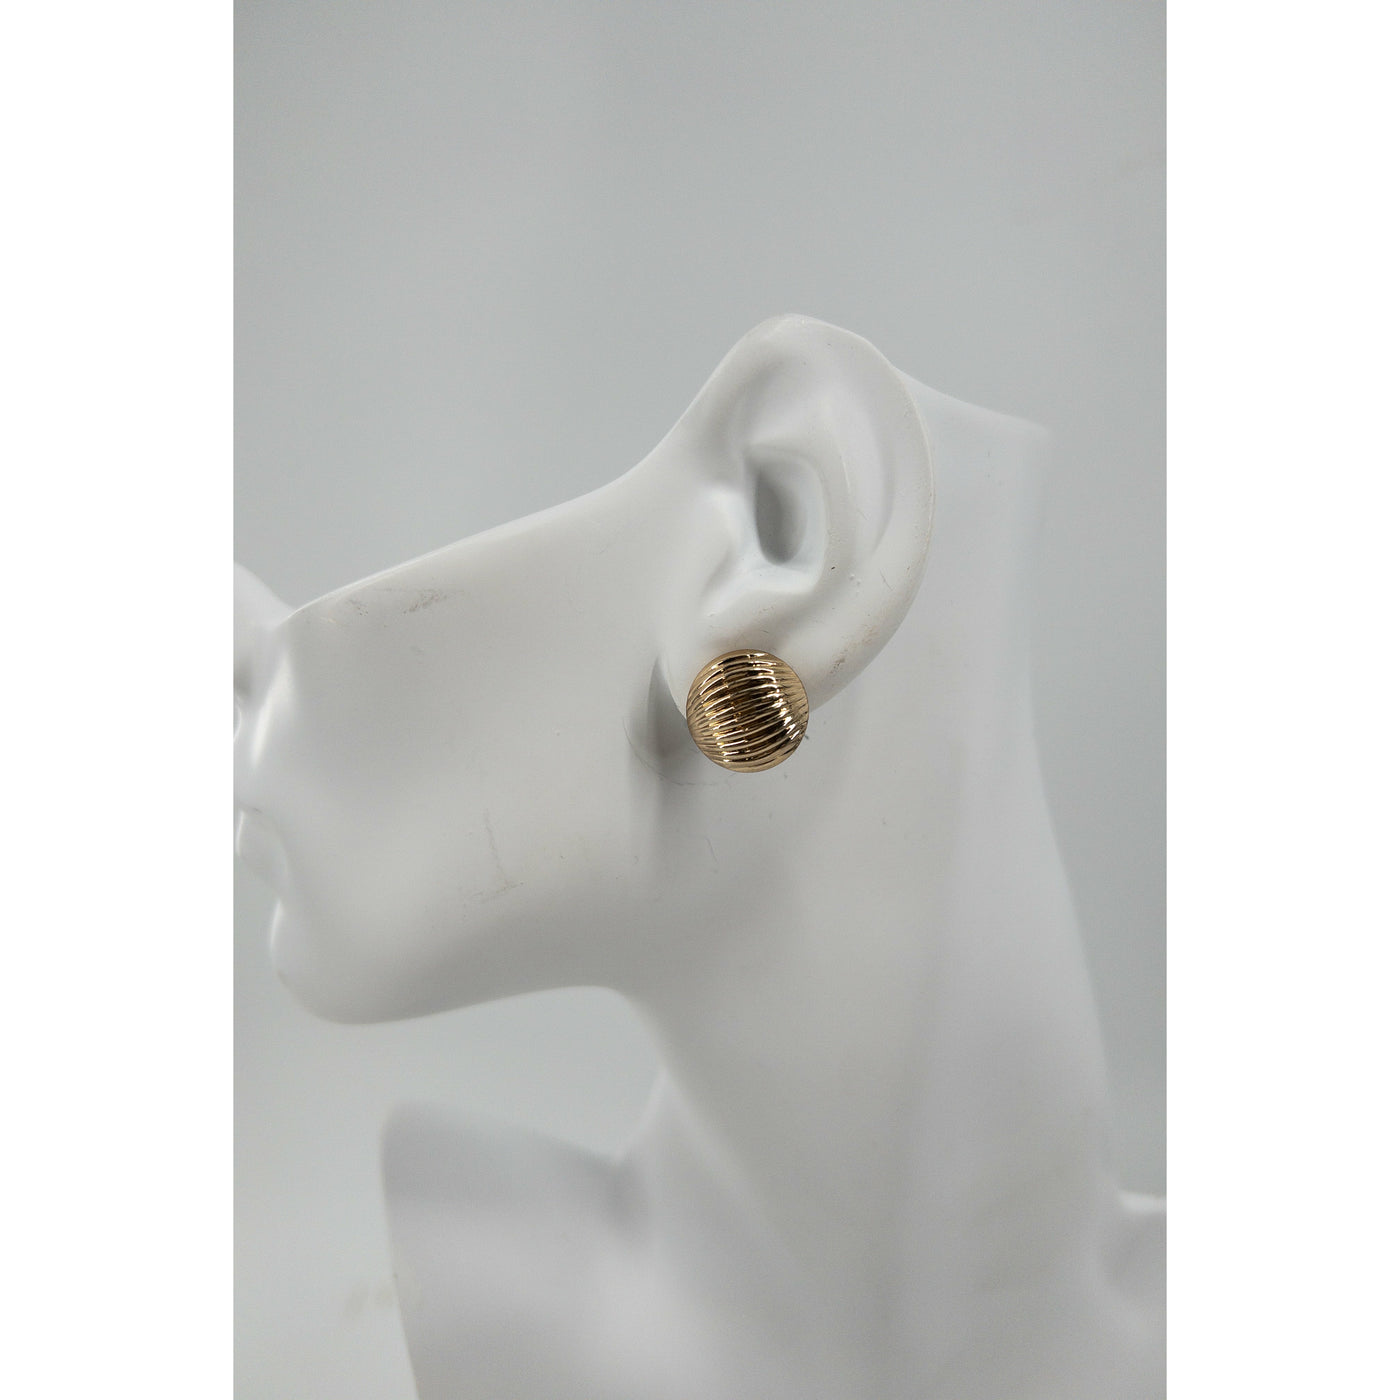 Statement Round Gold stud earrings